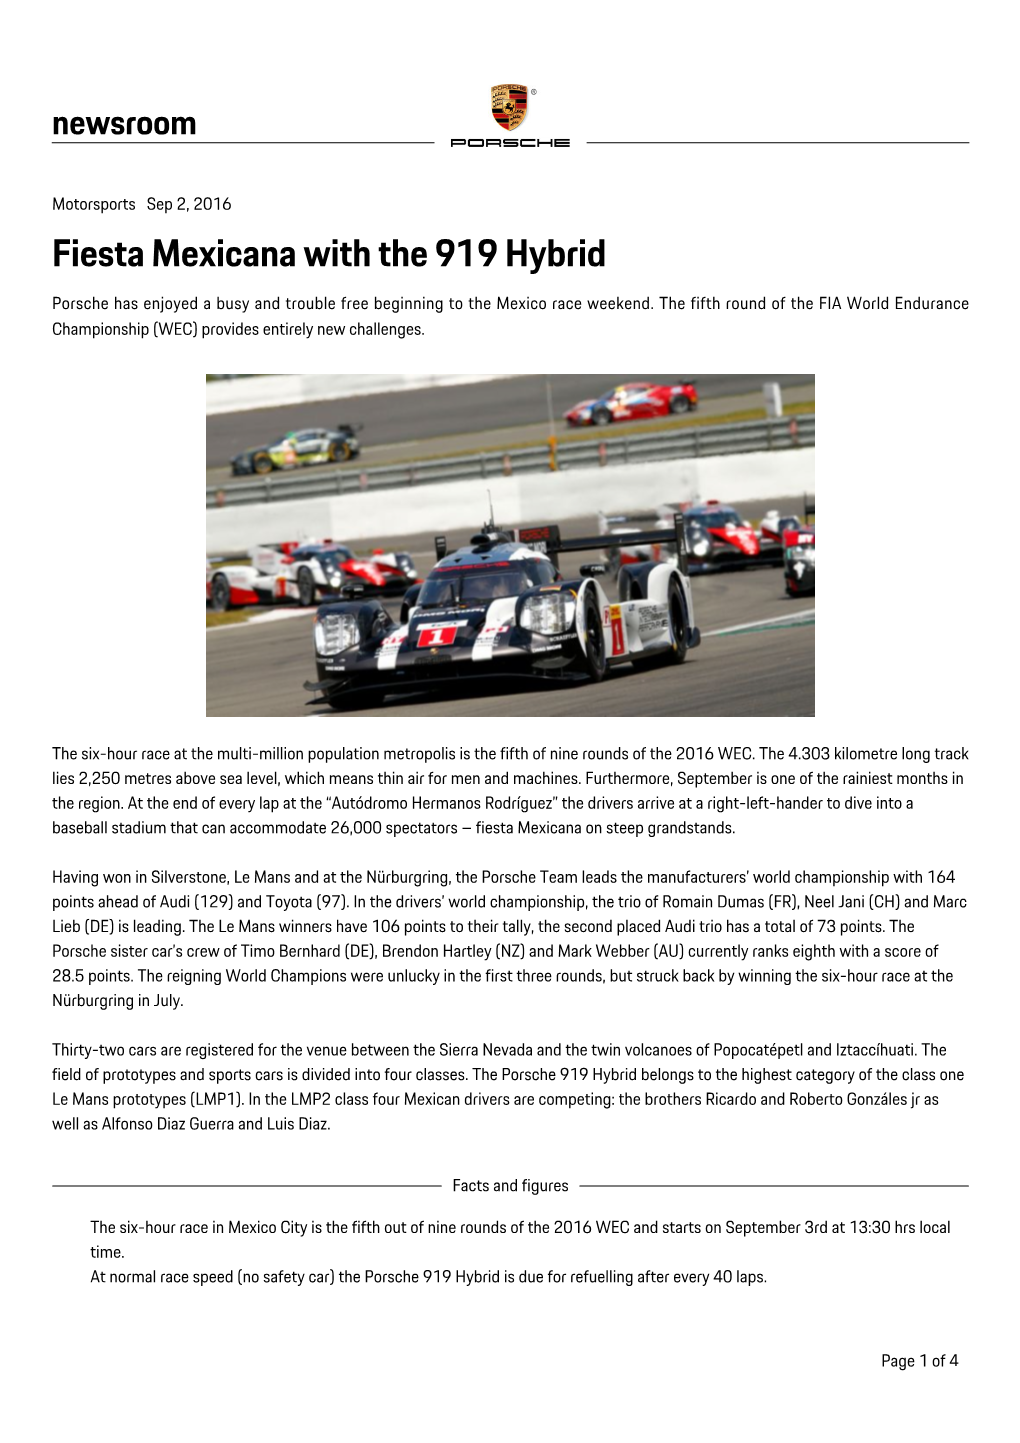 Fiesta Mexicana with the 919 Hybrid Porsche Has Enjoyed a Busy and Trouble Free Beginning to the Mexico Race Weekend